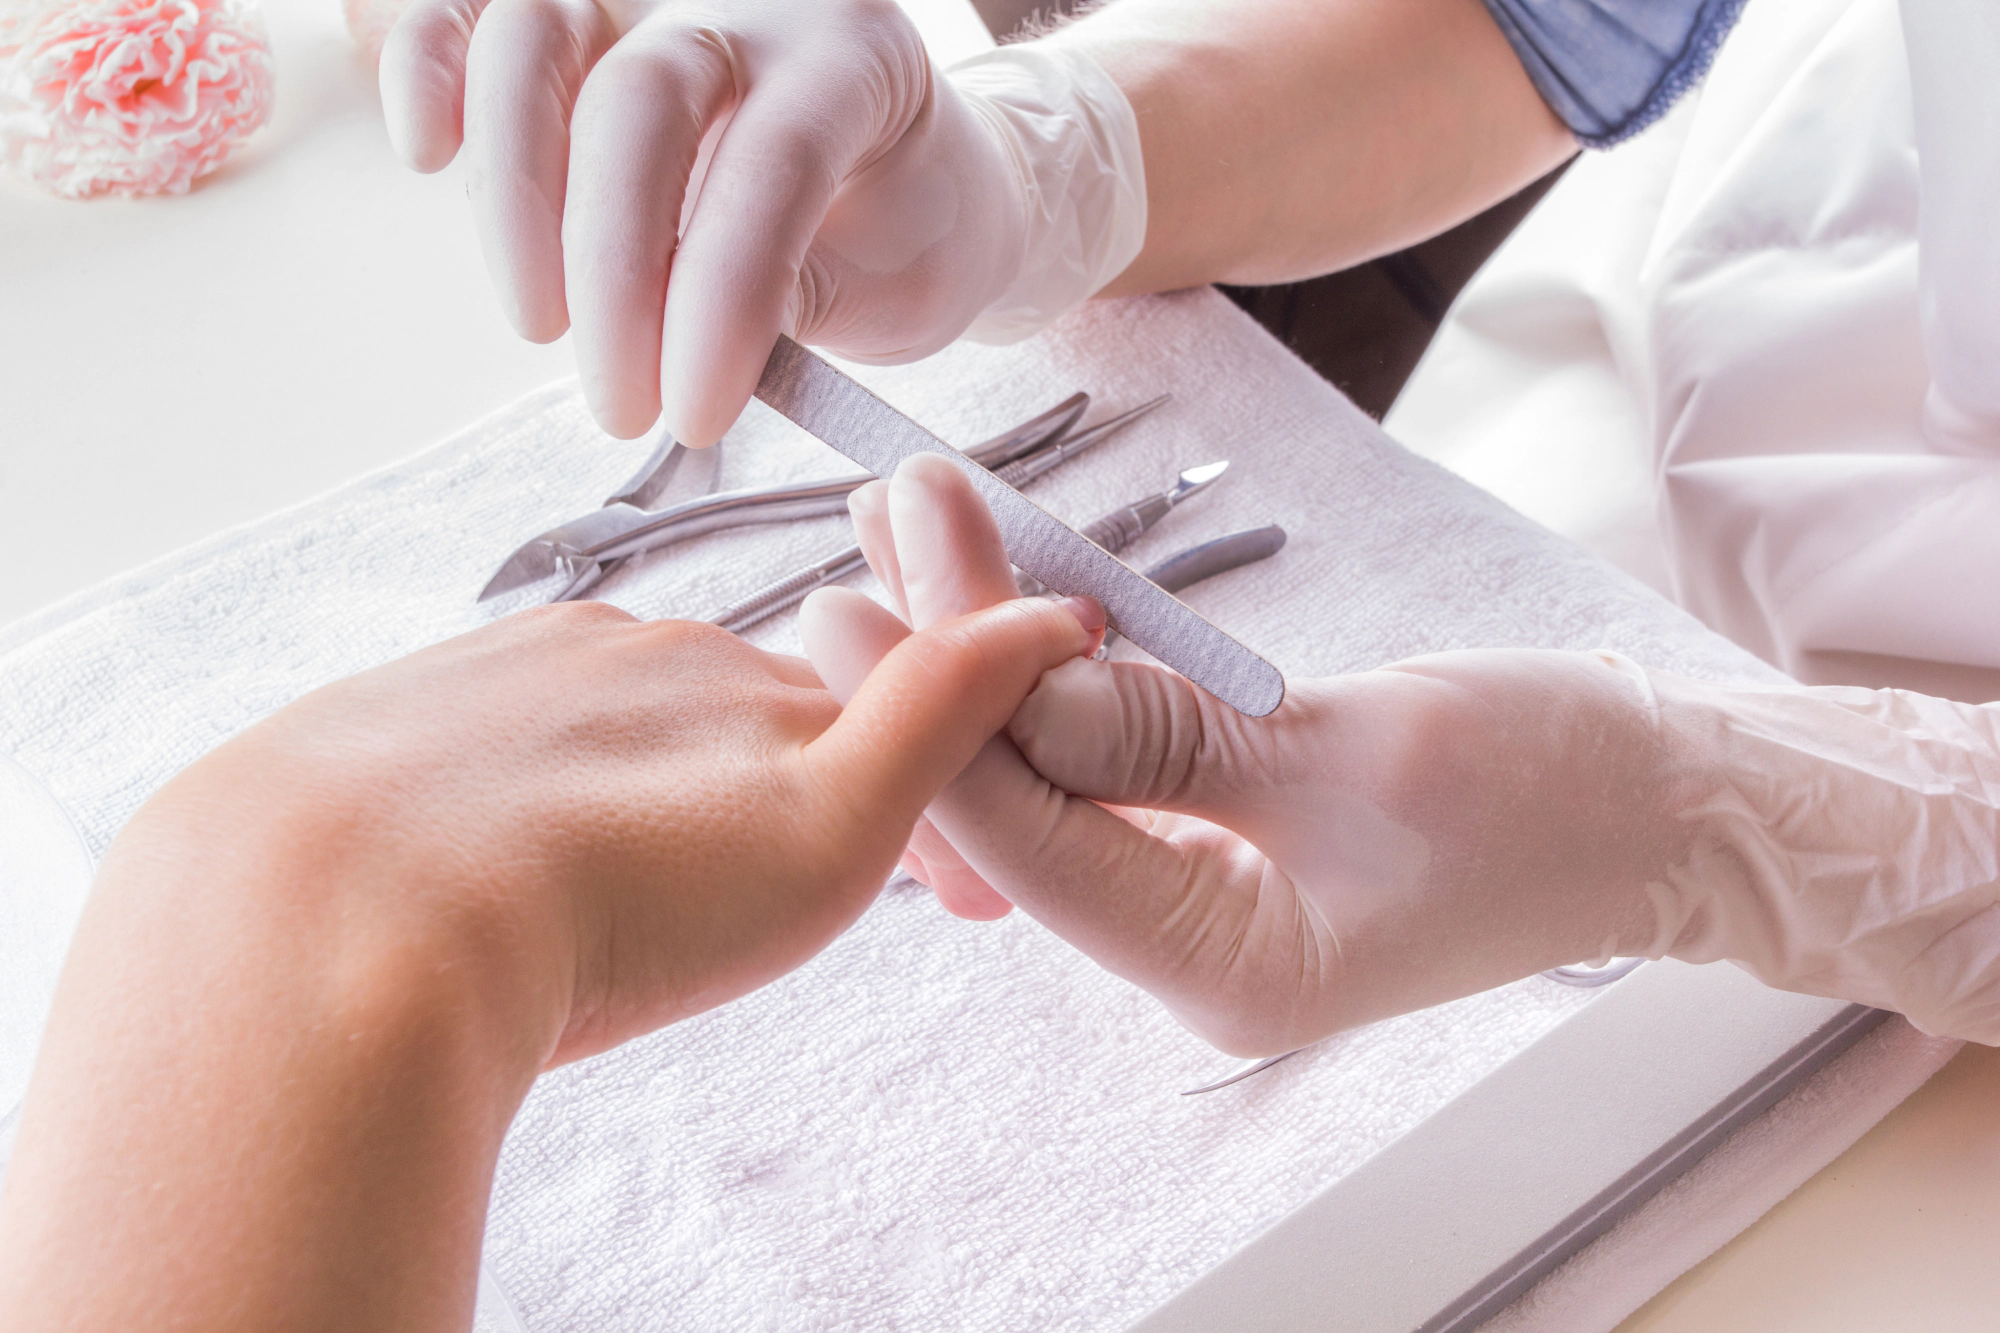 How To Be Safe At The Nail Salon— A Helpful Guide For Those Fighting Cancer!